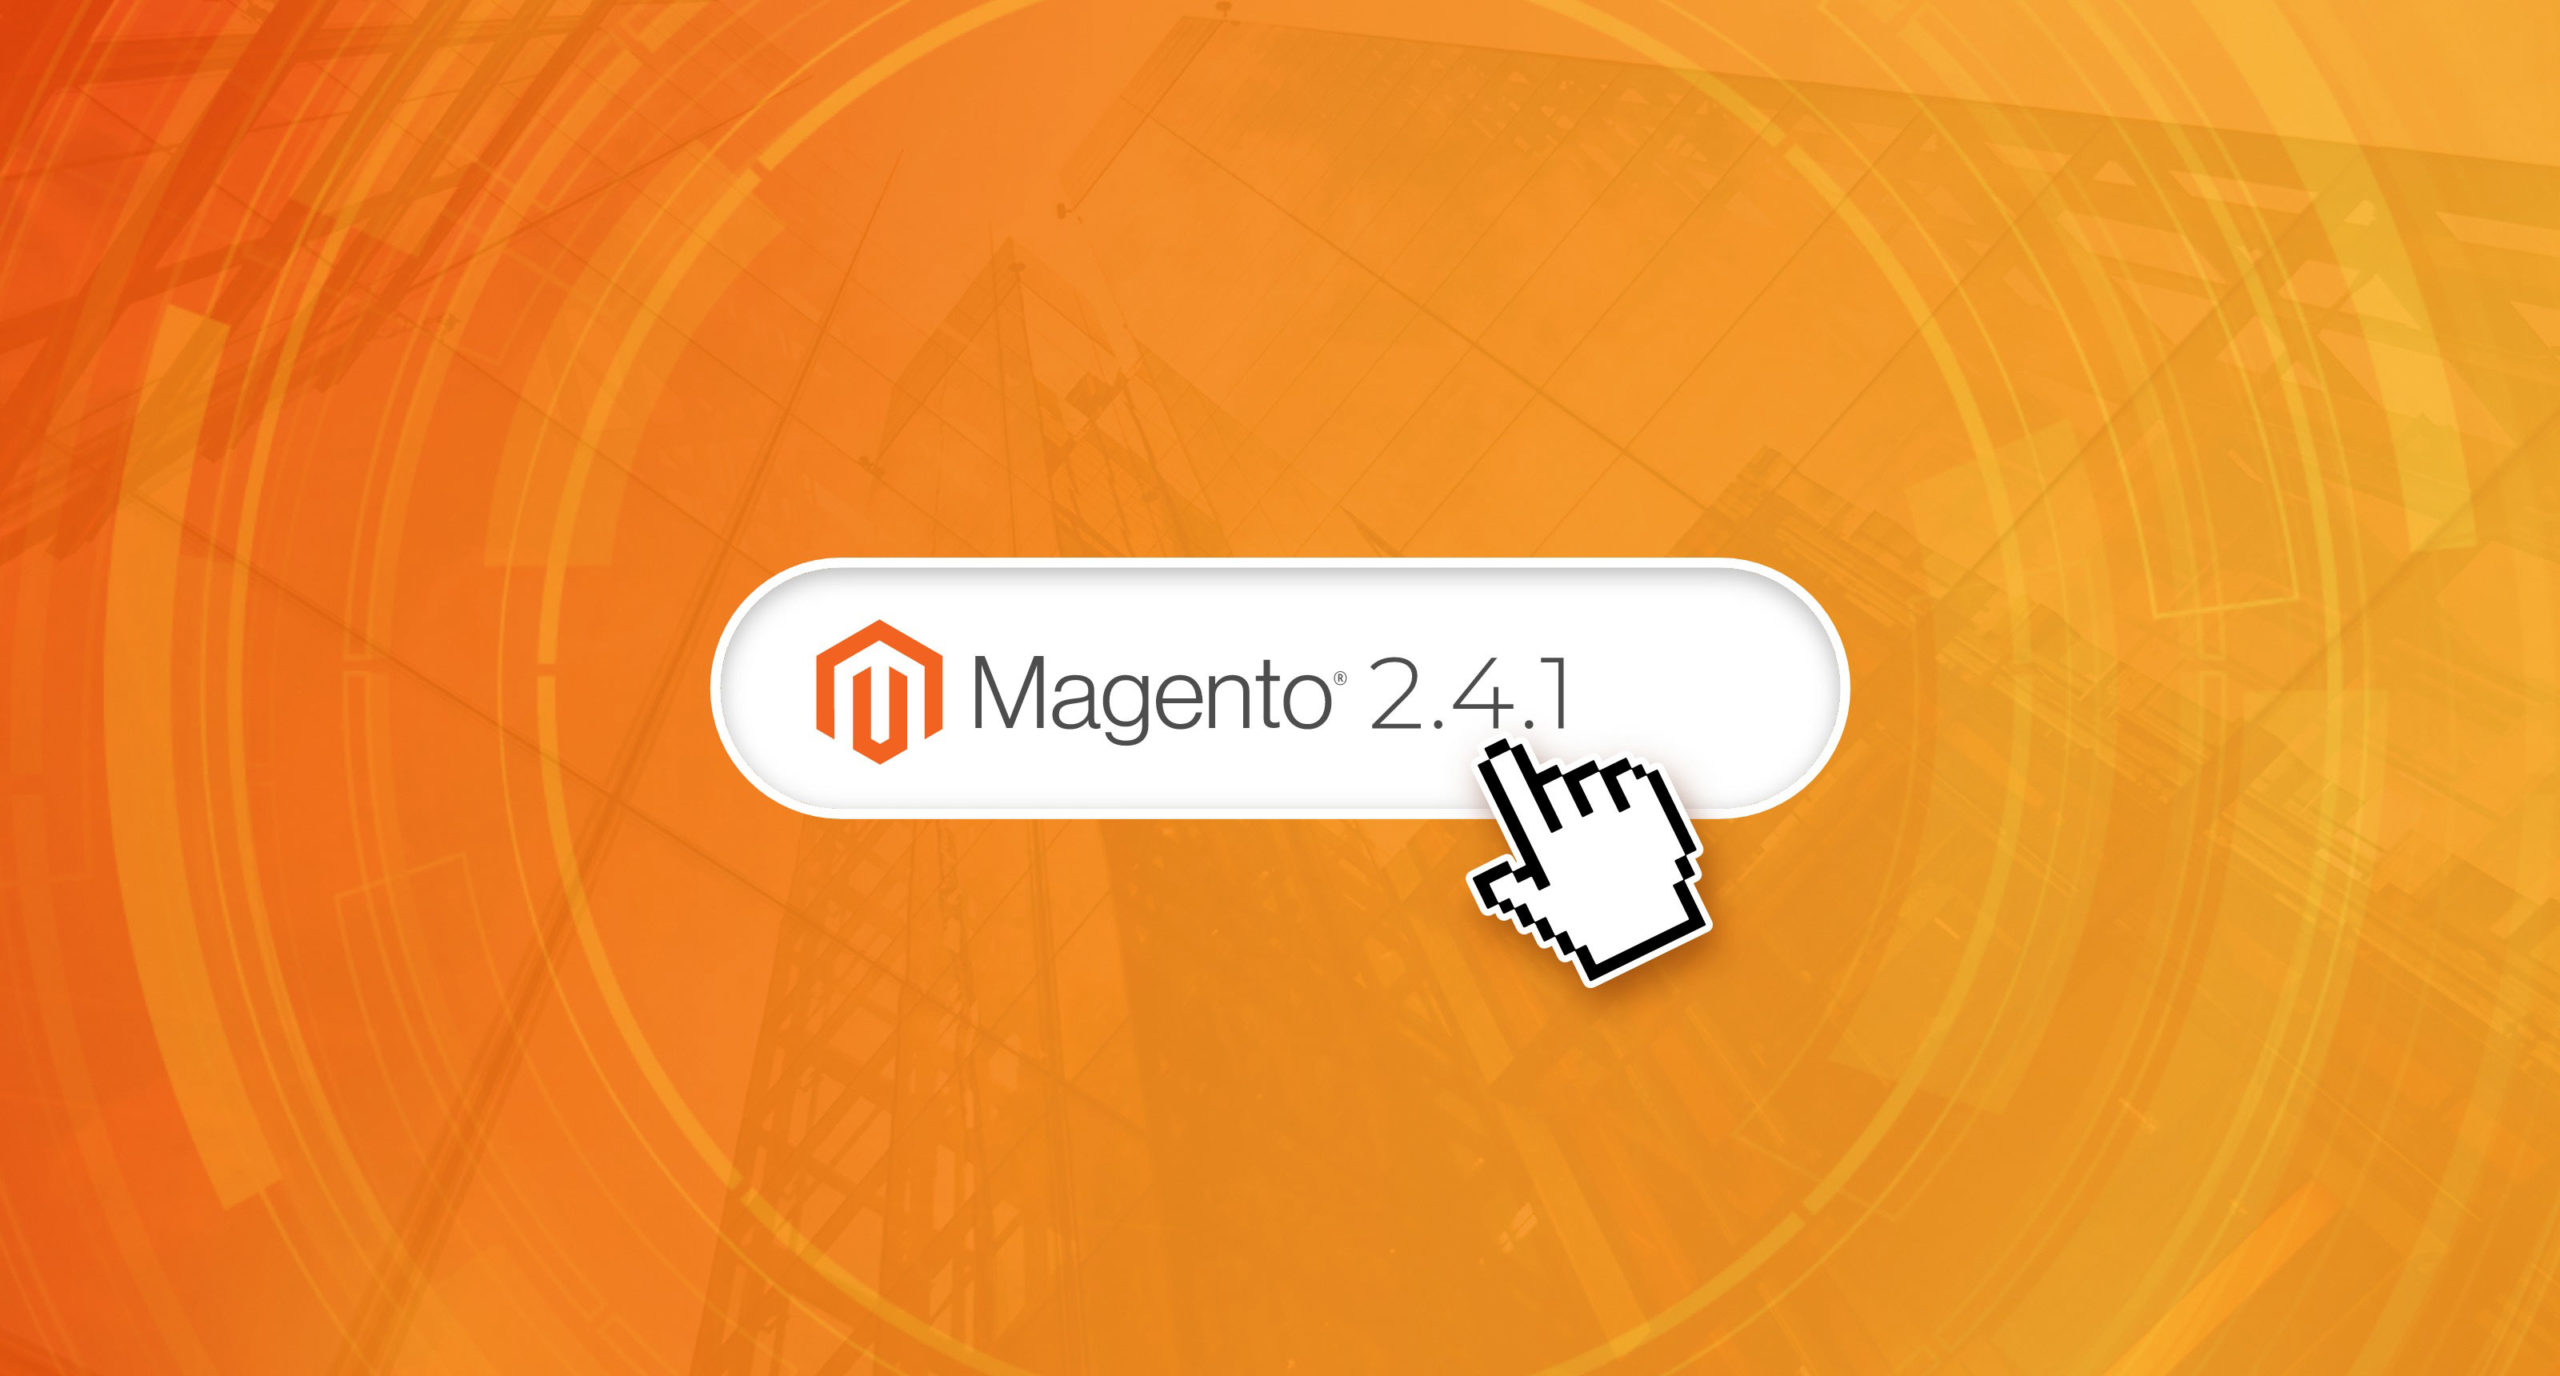 Magento 2.4.1 – Check Out the Latest Version